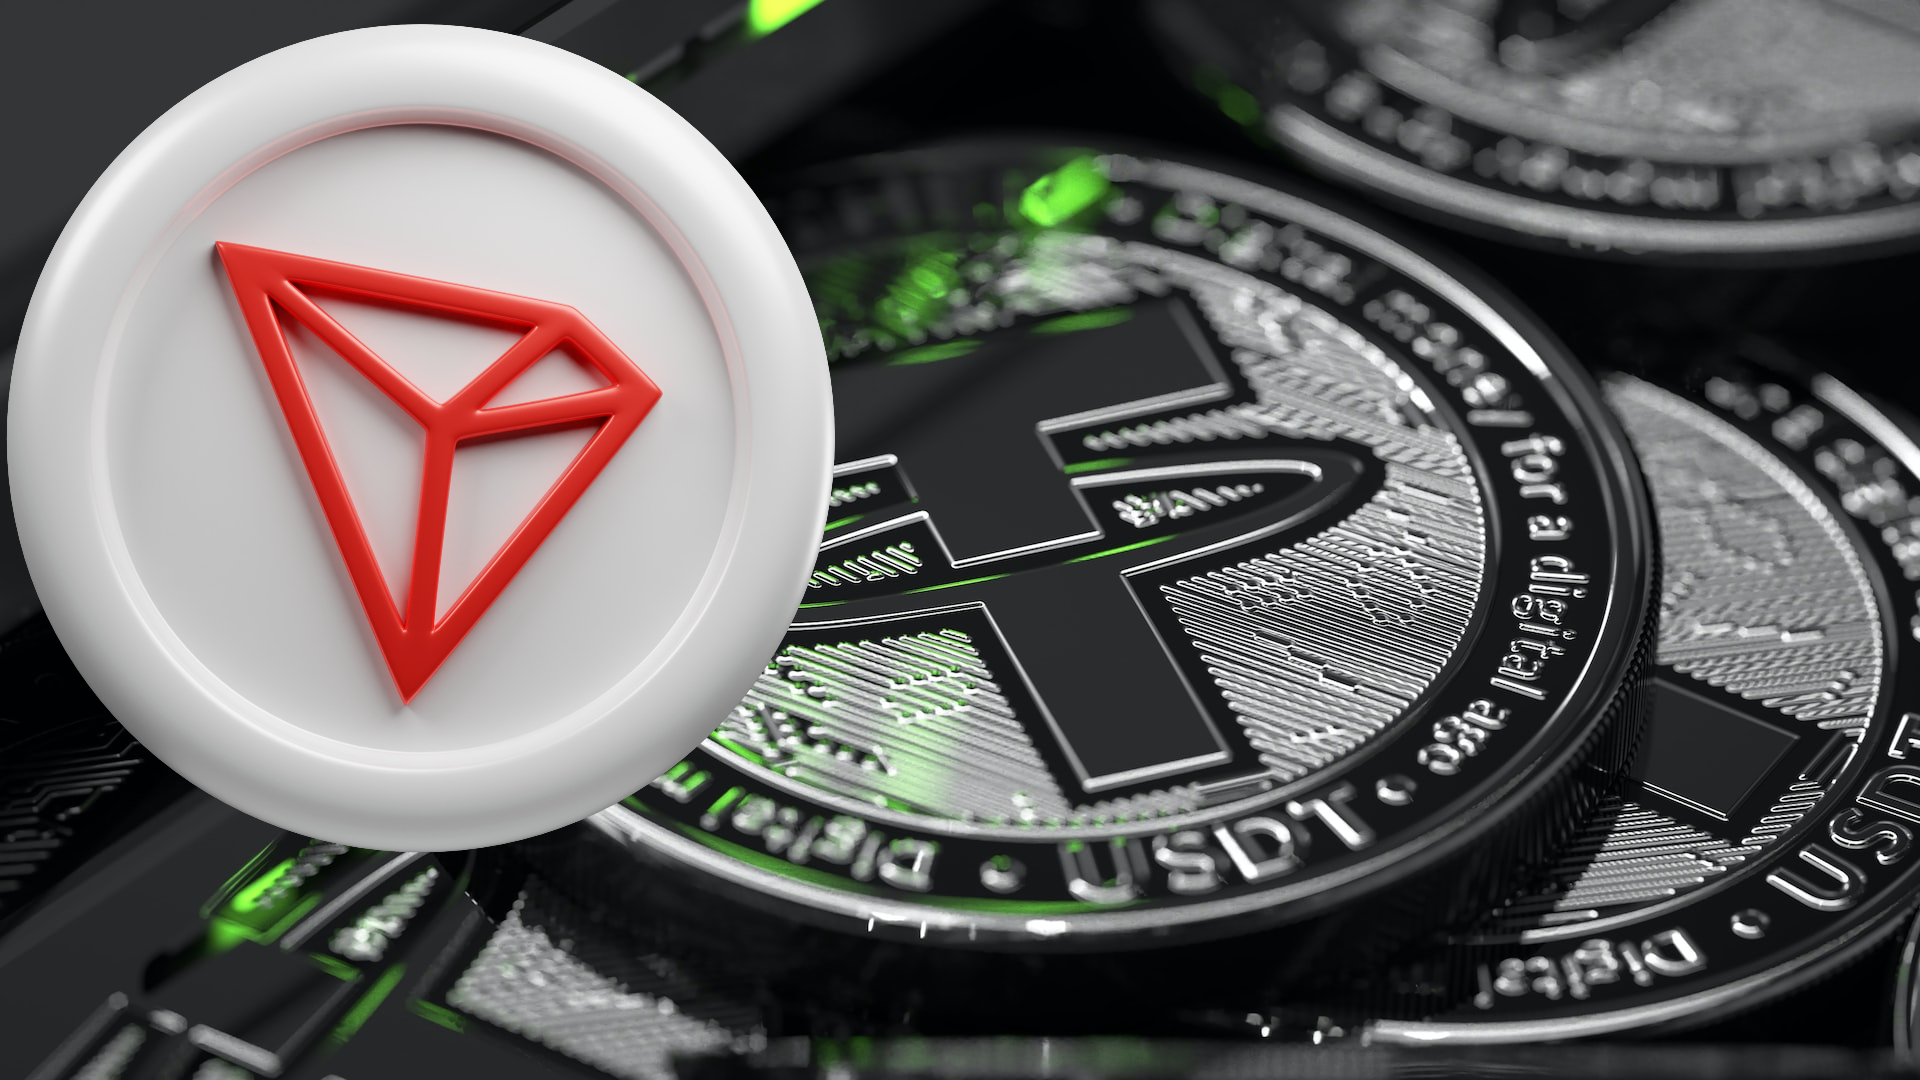 TRON's DAO announced it would buy $1 billion worth of USDT